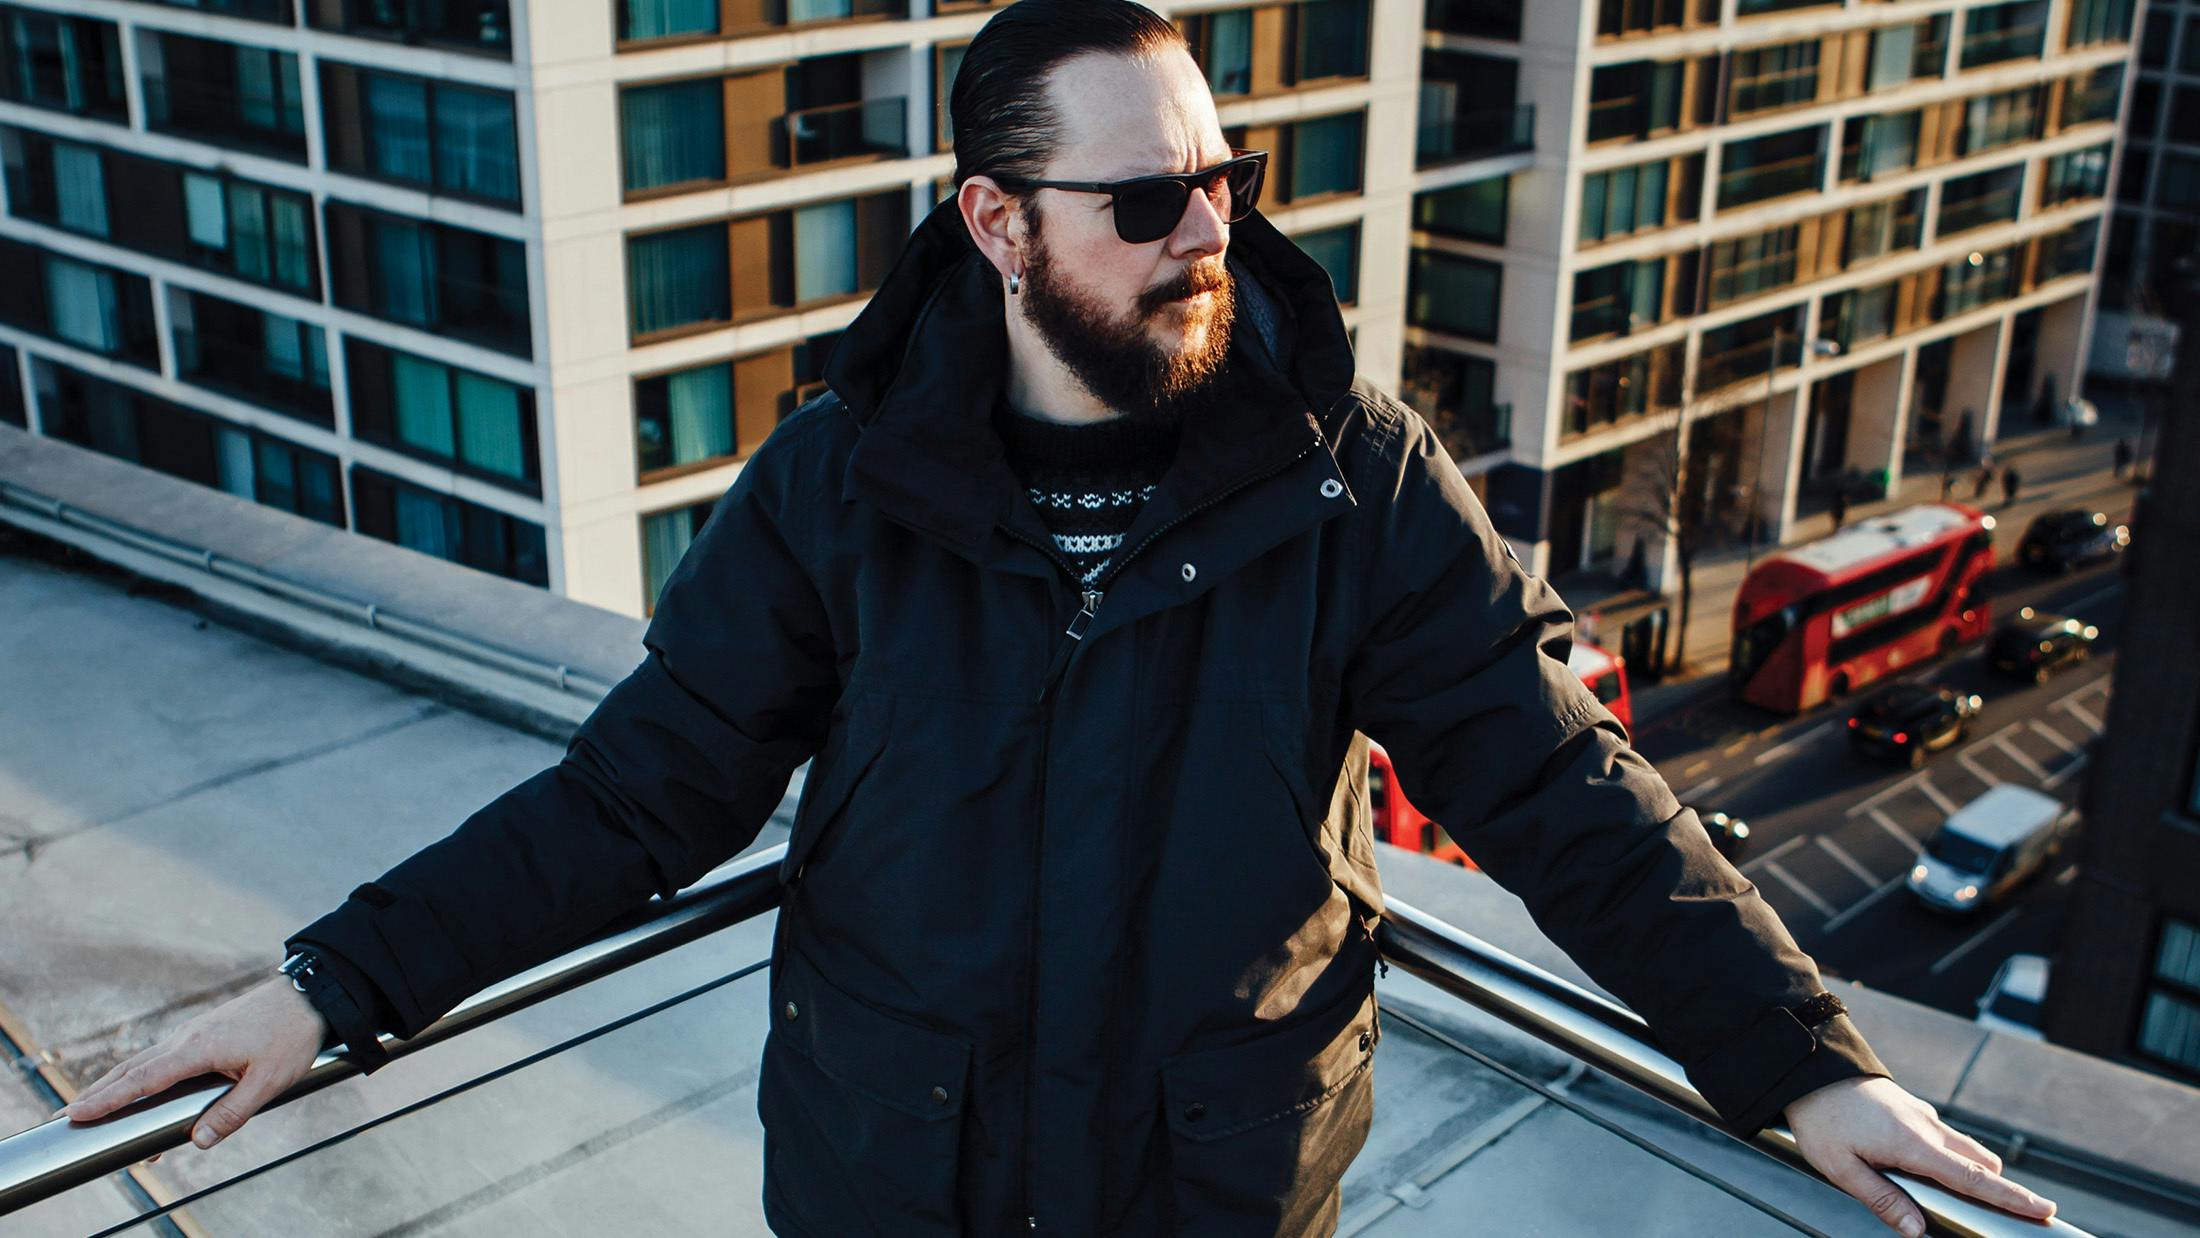 Ihsahn: “A black metal artist allowing someone to tell them what to do? Nobody wants that…”